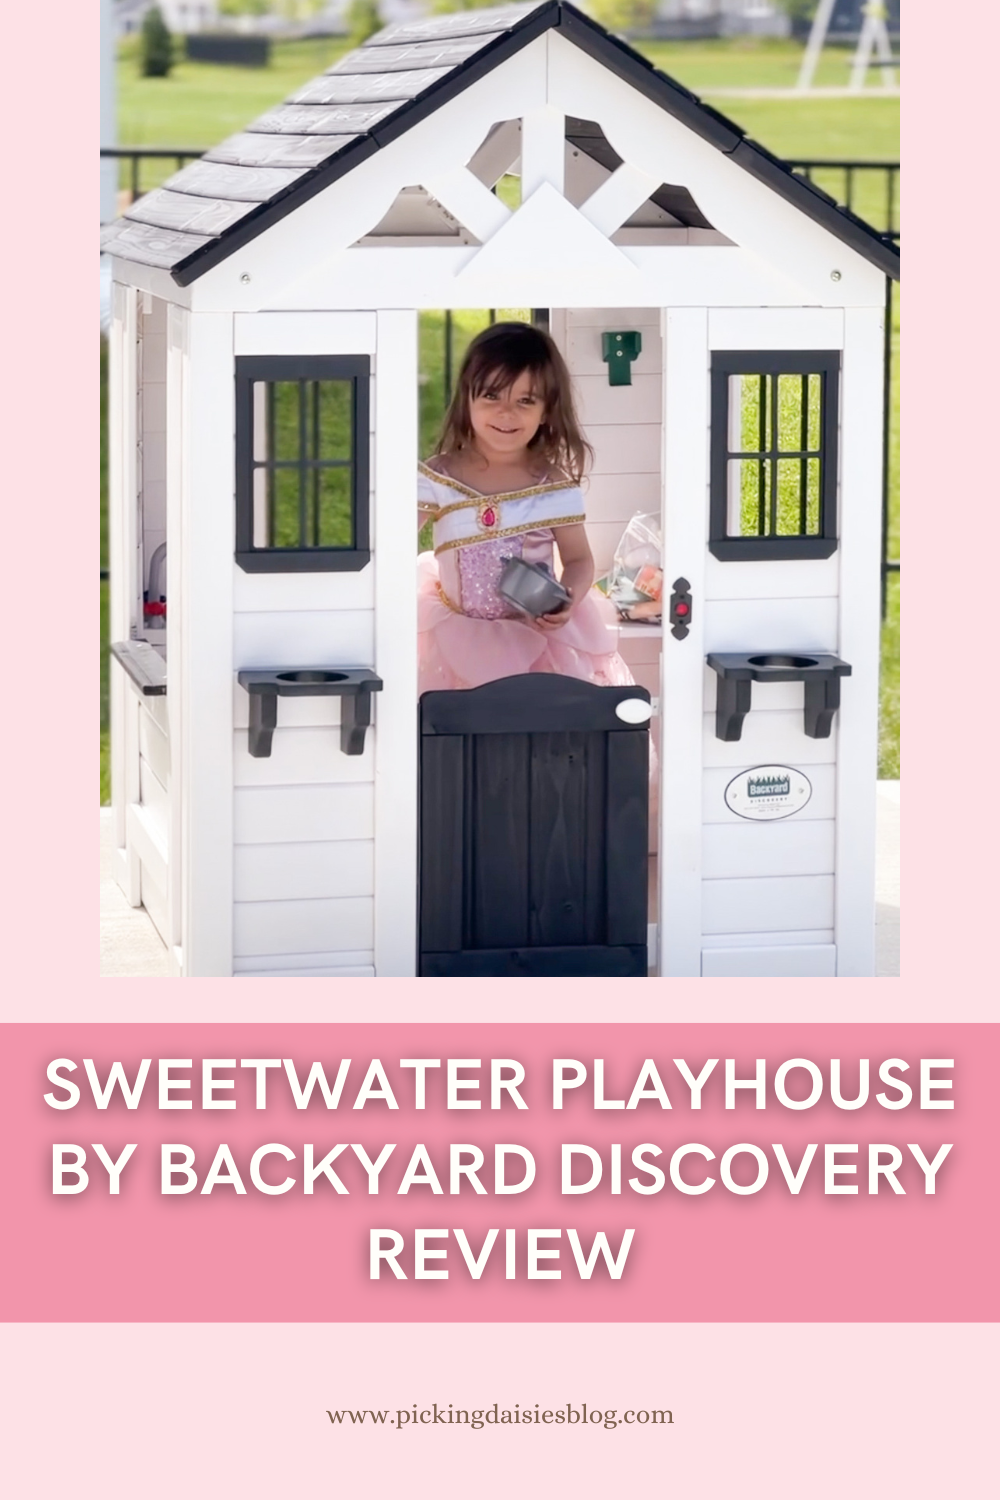 Discover the joy of outdoor play and imaginative adventures with a Backyard Discovery Playhouse. Encourage your children's creativity, foster independence, and create lasting family memories. Explore our wide range of playhouses and make this summer unforgettable!